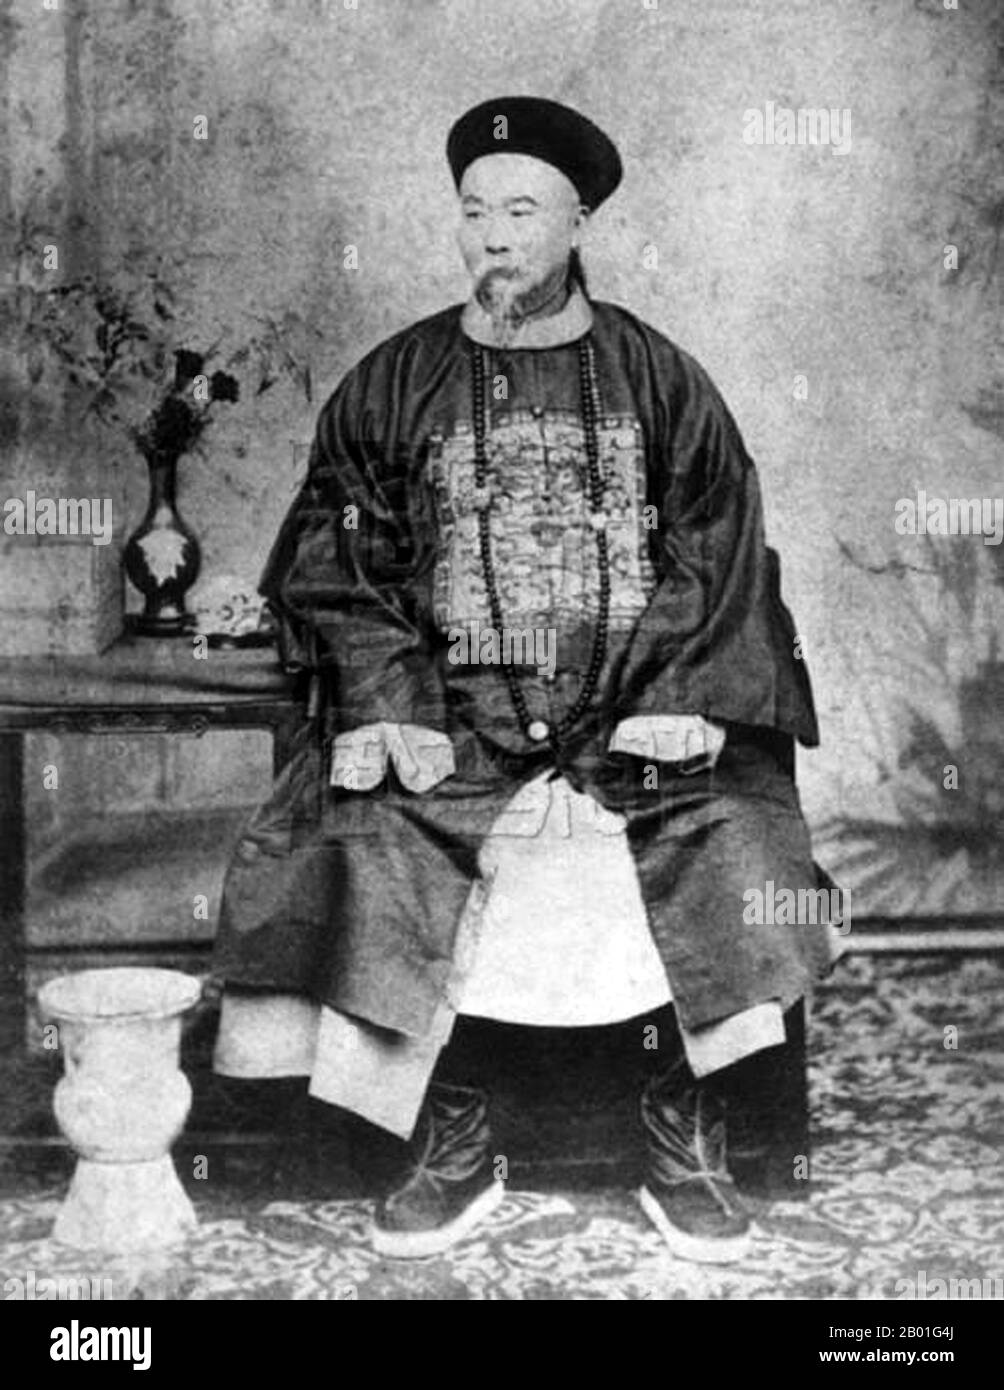 China: Zeng Guofan (26 November 1811 - 12 March 1872), statesman and victorious general for the Qing Dynasty against the Taiping Rebellion, c. 1860s.  Zeng Guofan, Marquis Yiyong, birth name Zeng Zicheng and courtesy name Bohan, was an eminent Han Chinese official, general and devout Confucian scholar of the late Qing Dynasty.  Zeng raised the Xiang Army to fight effectively against the Taiping Rebellion and restored the stability of  the Qing Empire alongside other prominent figures such as Zuo Zongtang and Li Hongzhang, setting the scene for the era known as the 'Tongzhi Restoration'. Stock Photo